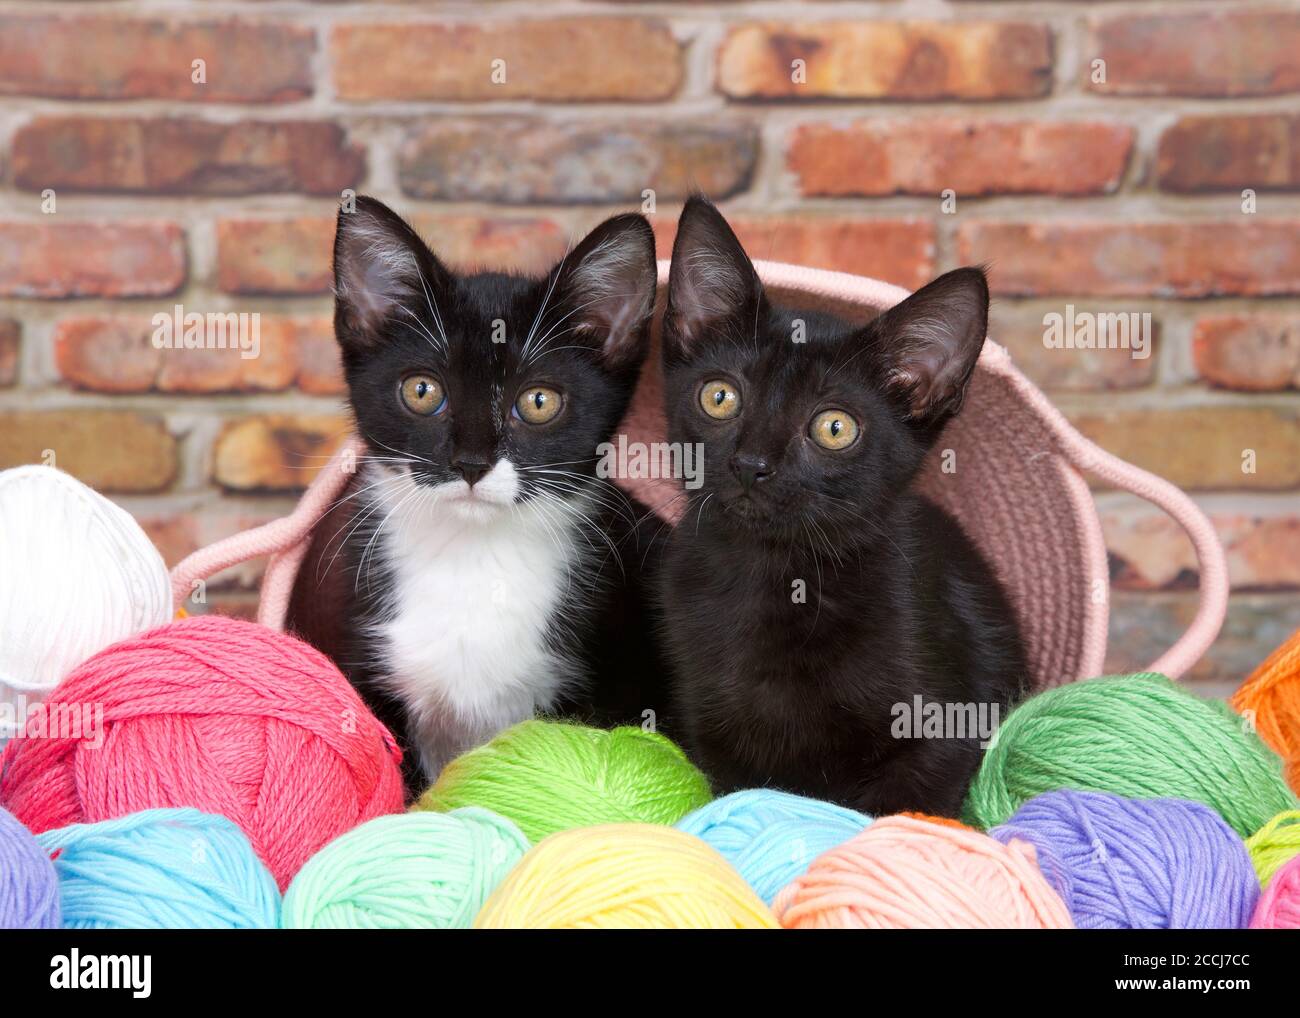 Black kitten and Tuxedo kitten peaking out of a pink yarn basket surrounded by colorful balls of yarn. Brick background. Stock Photo